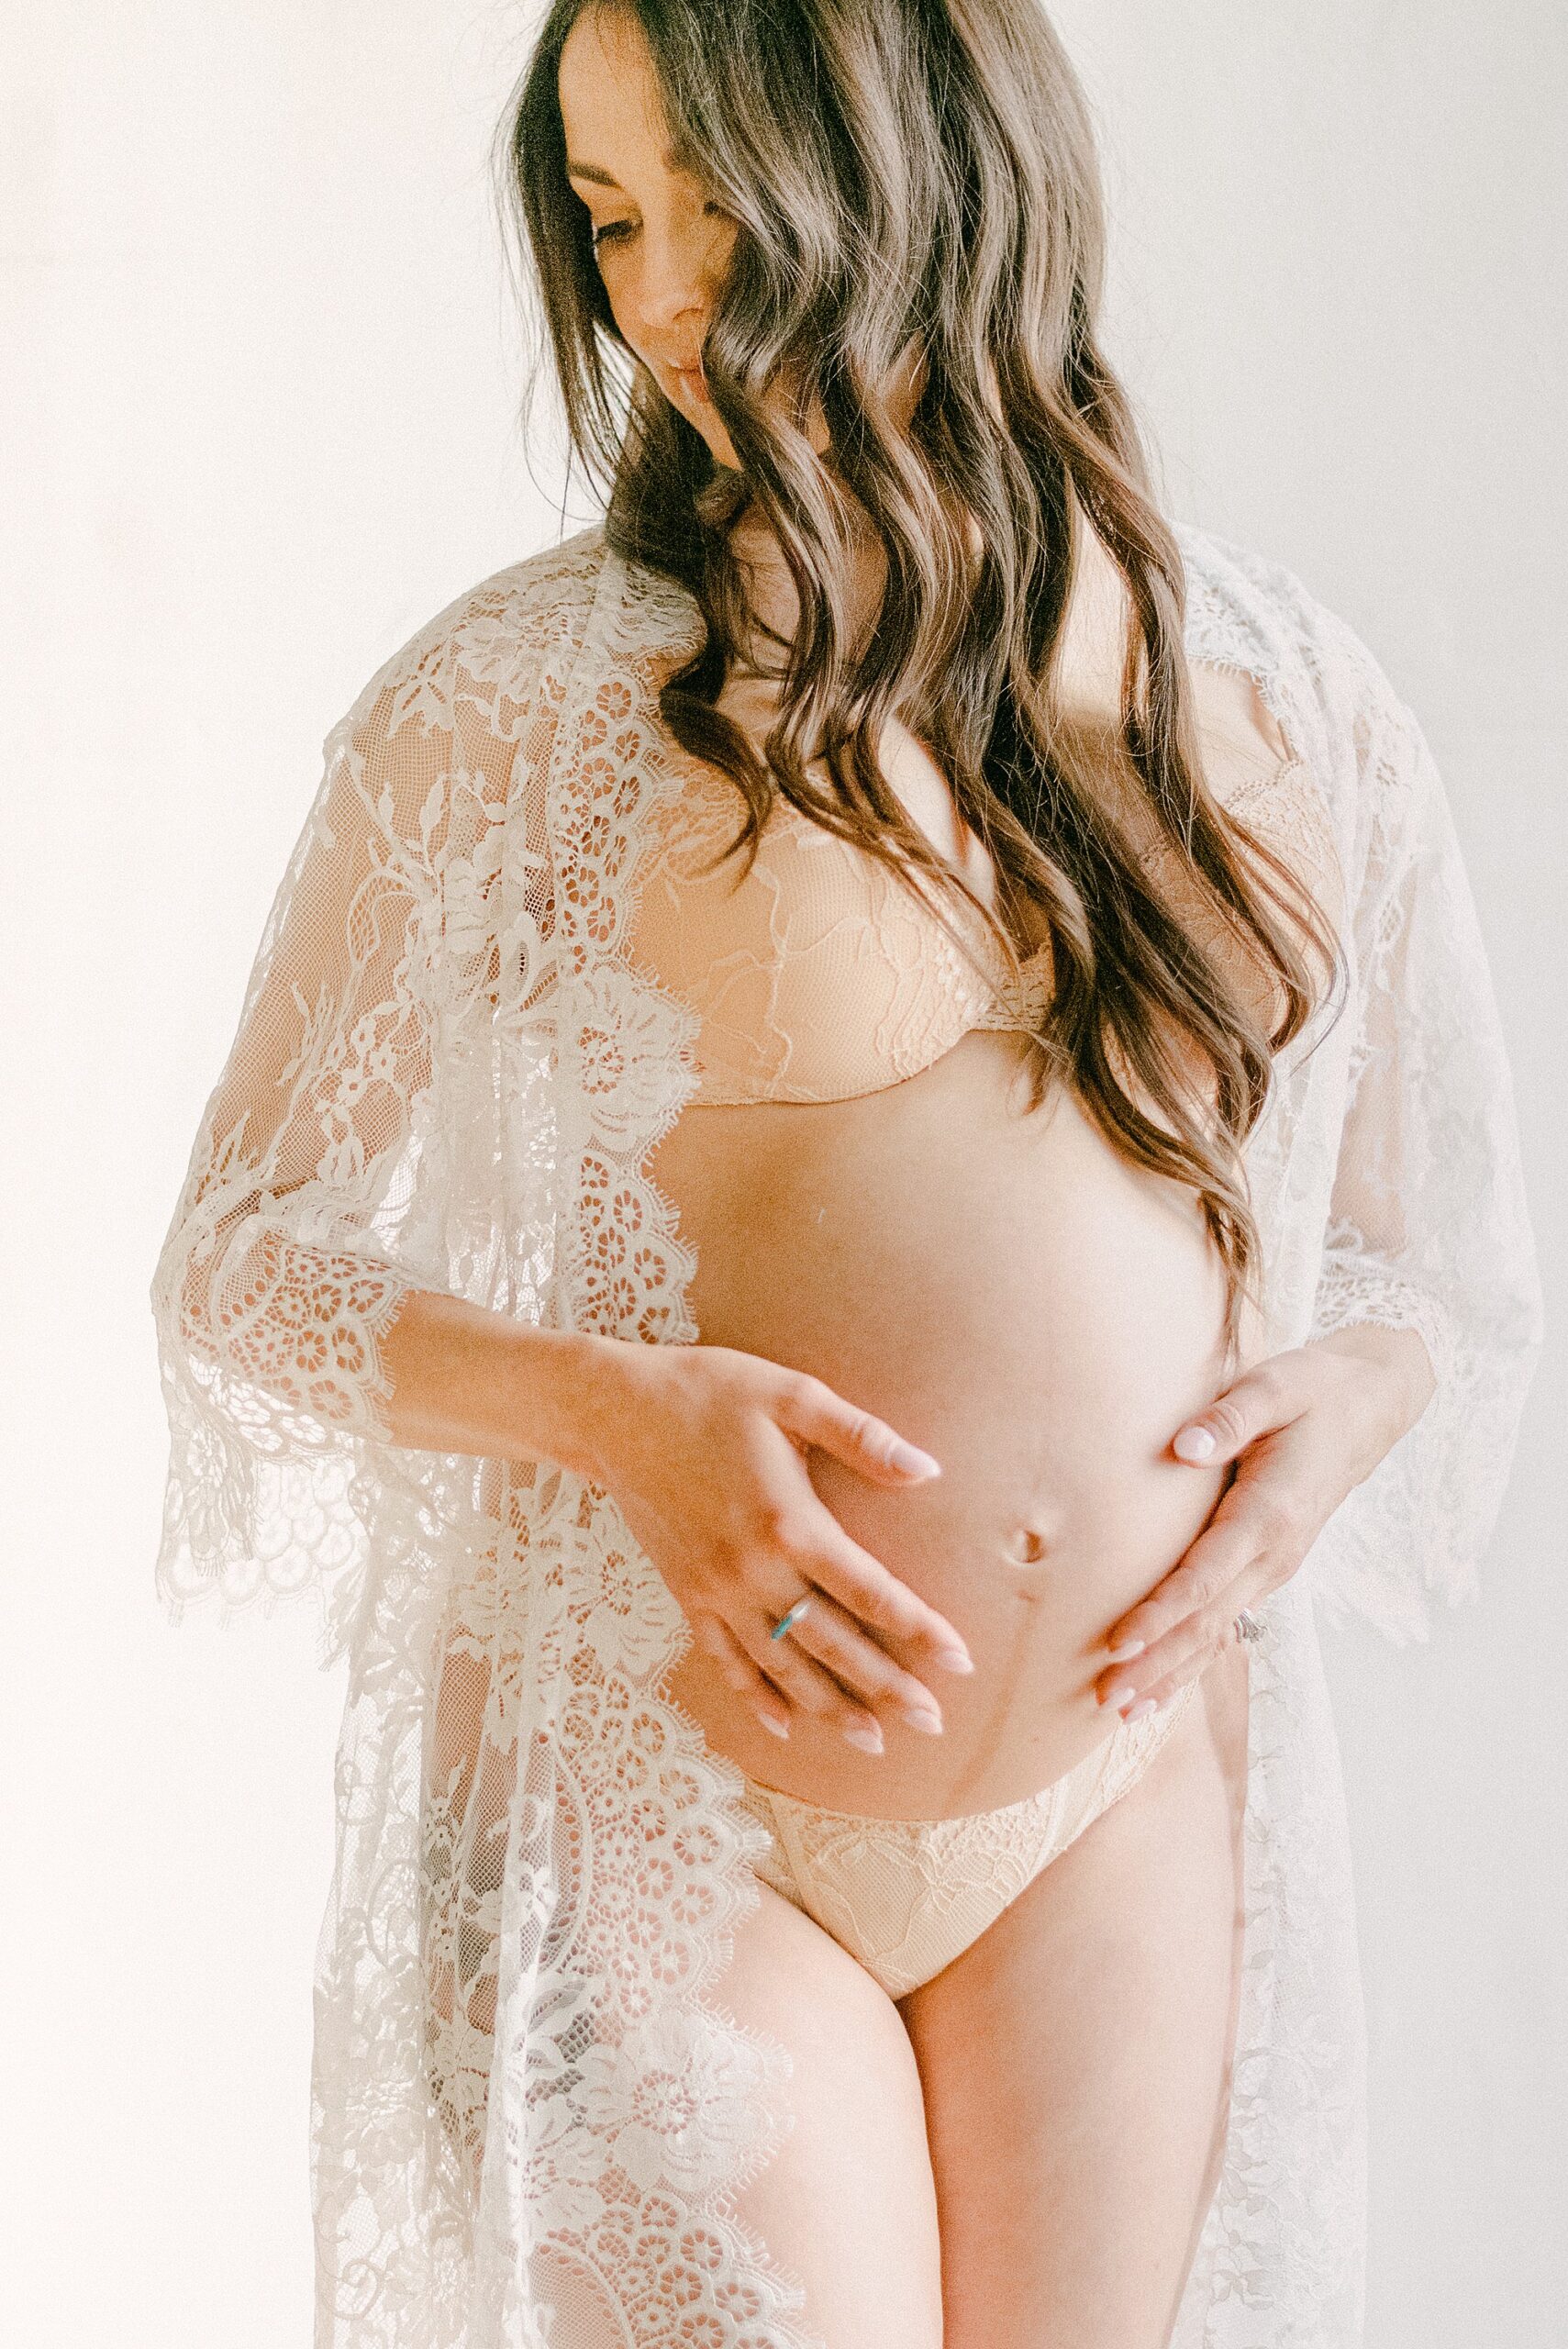 Intimate maternity boudoir photo of mom in white lace robe. She has both hands on her belly while looking off to the side with her hair on her face.